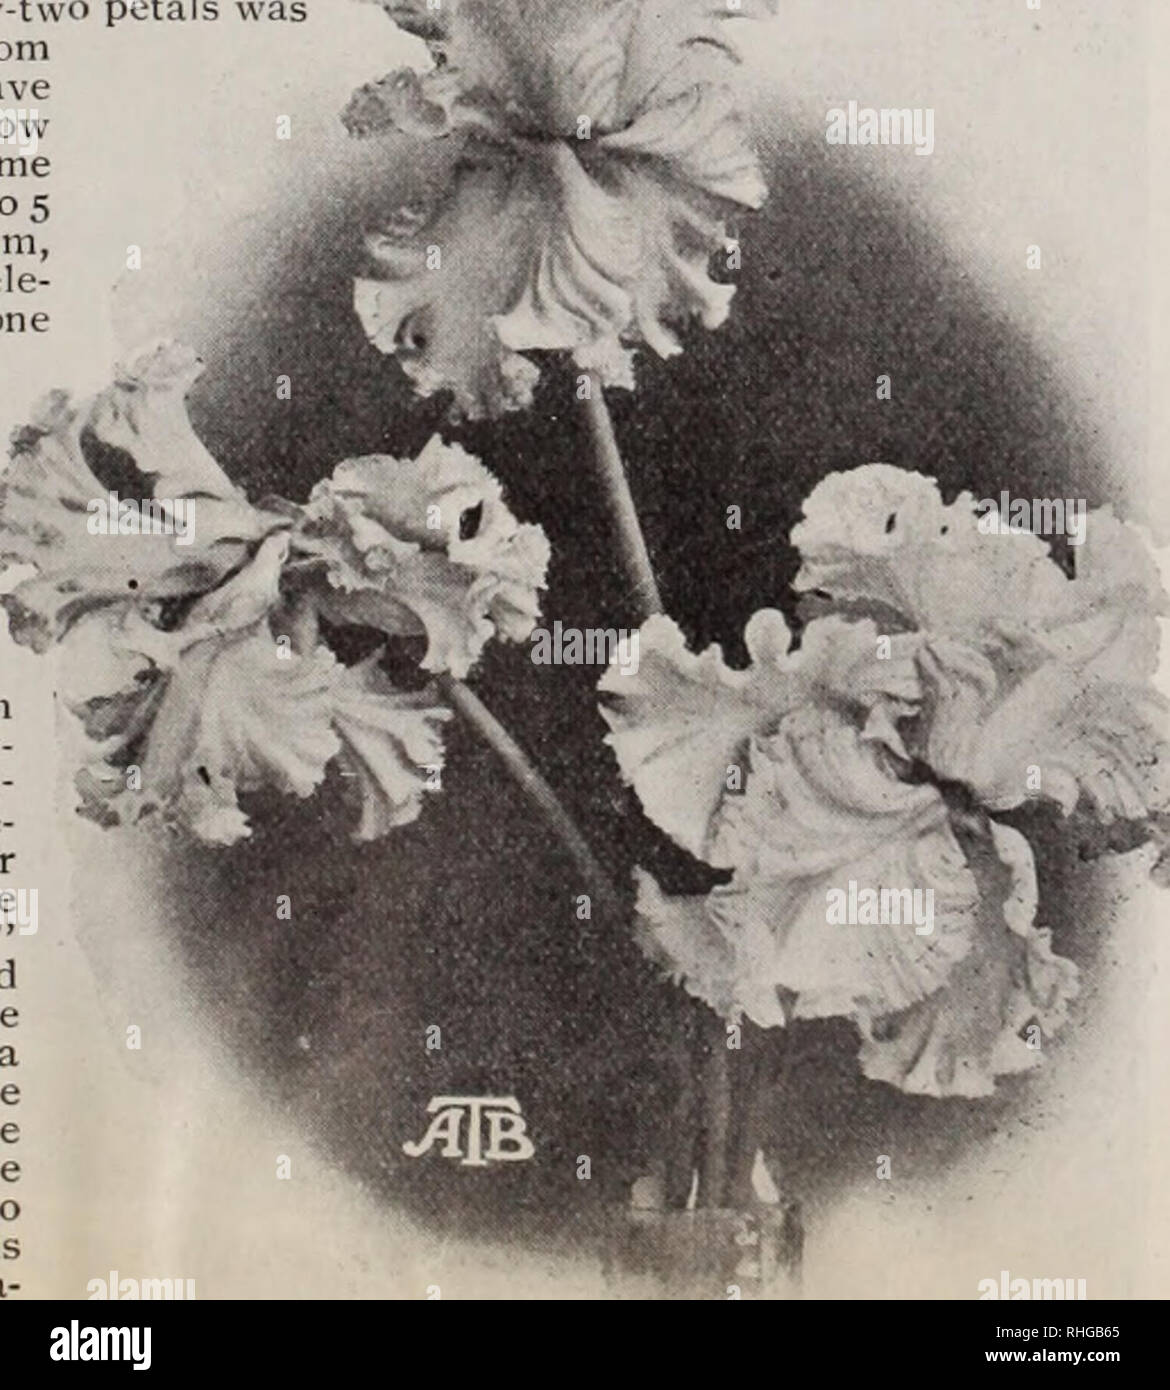 . Boddington's quality bulbs, seeds and plants / Arthur T. Boddington.. Nursery Catalogue. Burbank's Novelties Shirley Poppy, Celeste mine. Single Aster, Southcote Beauty HA. Beau- tiful sky-blue, lavender and gray shades in abun- dance; never before off- ered; very choice and rare. Pkt. 10 cts., 3 for 25 cts., yioz. $1. Ipomoea. &quot;New Imperial Car- HA. One of the wonderful Jap- panese Morning Glories which, unlike most of this class, will grow anywhere and bloom abundantly all summer. Most gorgeous rosy carmine flowers 2% to 3 inches across with pure white throat. Pkt. 10 cts., 3 for 25 c Stock Photo